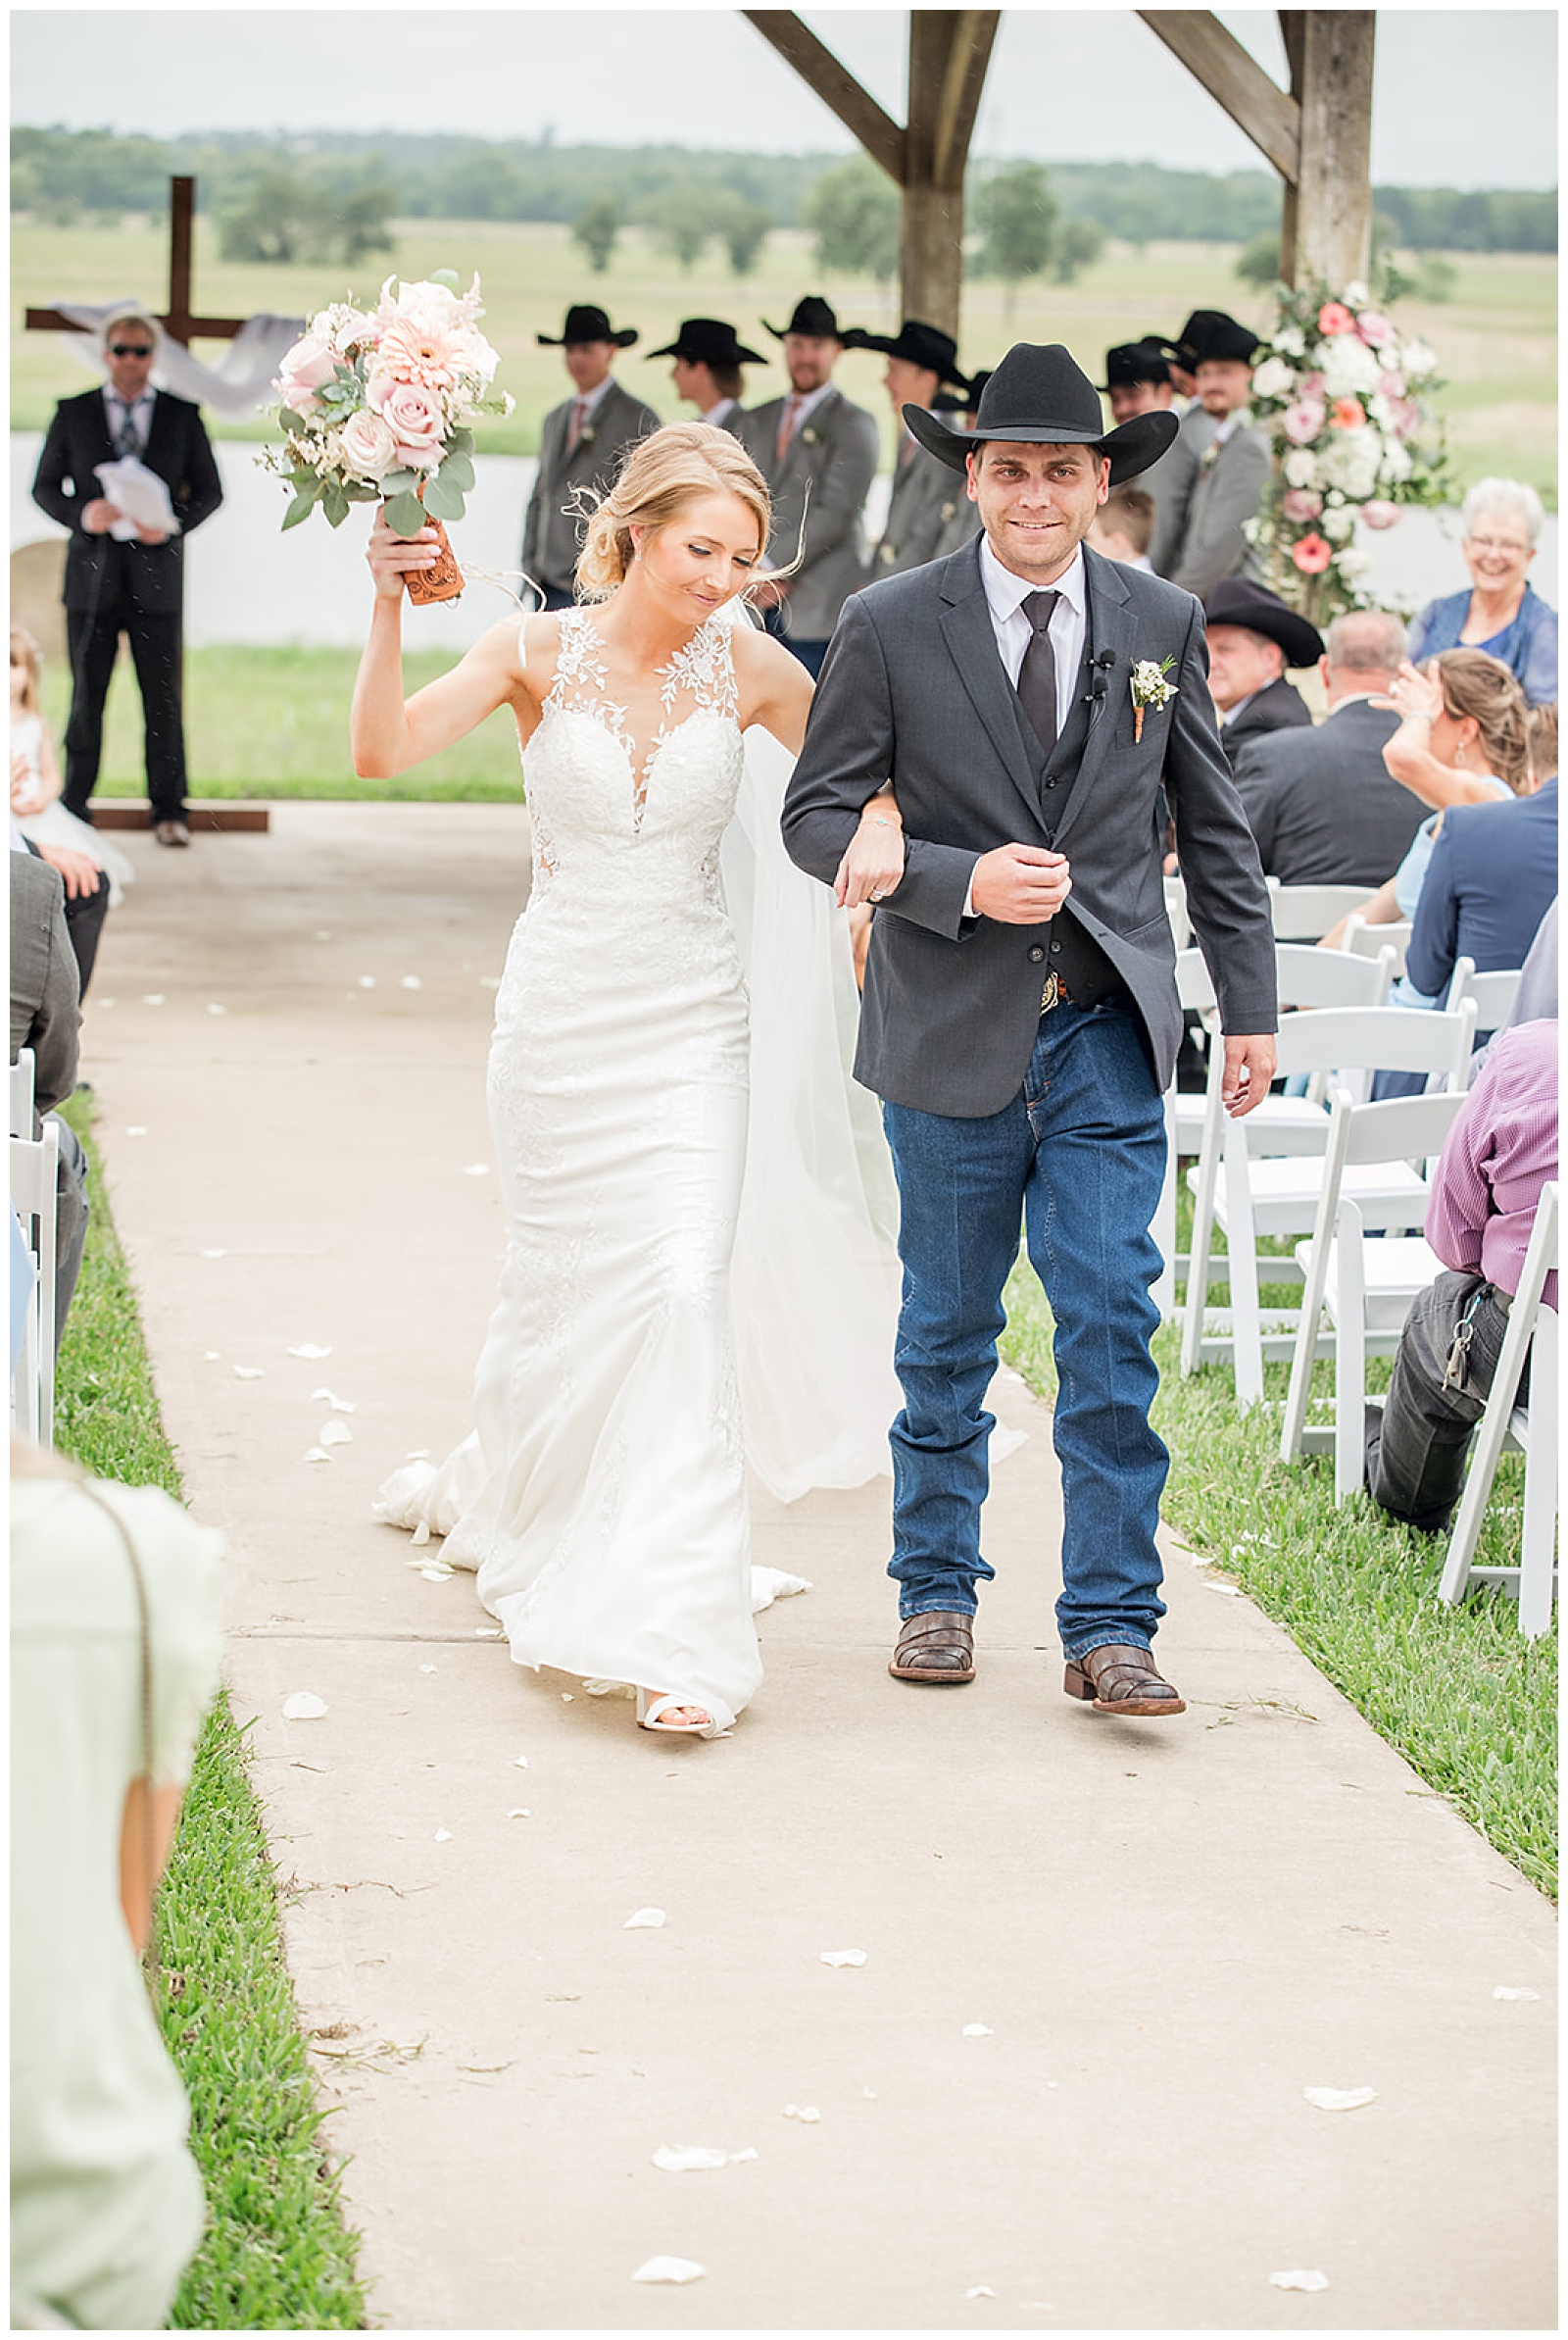 Husband and wife walking back down the aisle after the Texas wedding ceremony at Emery's Buffalo Creek